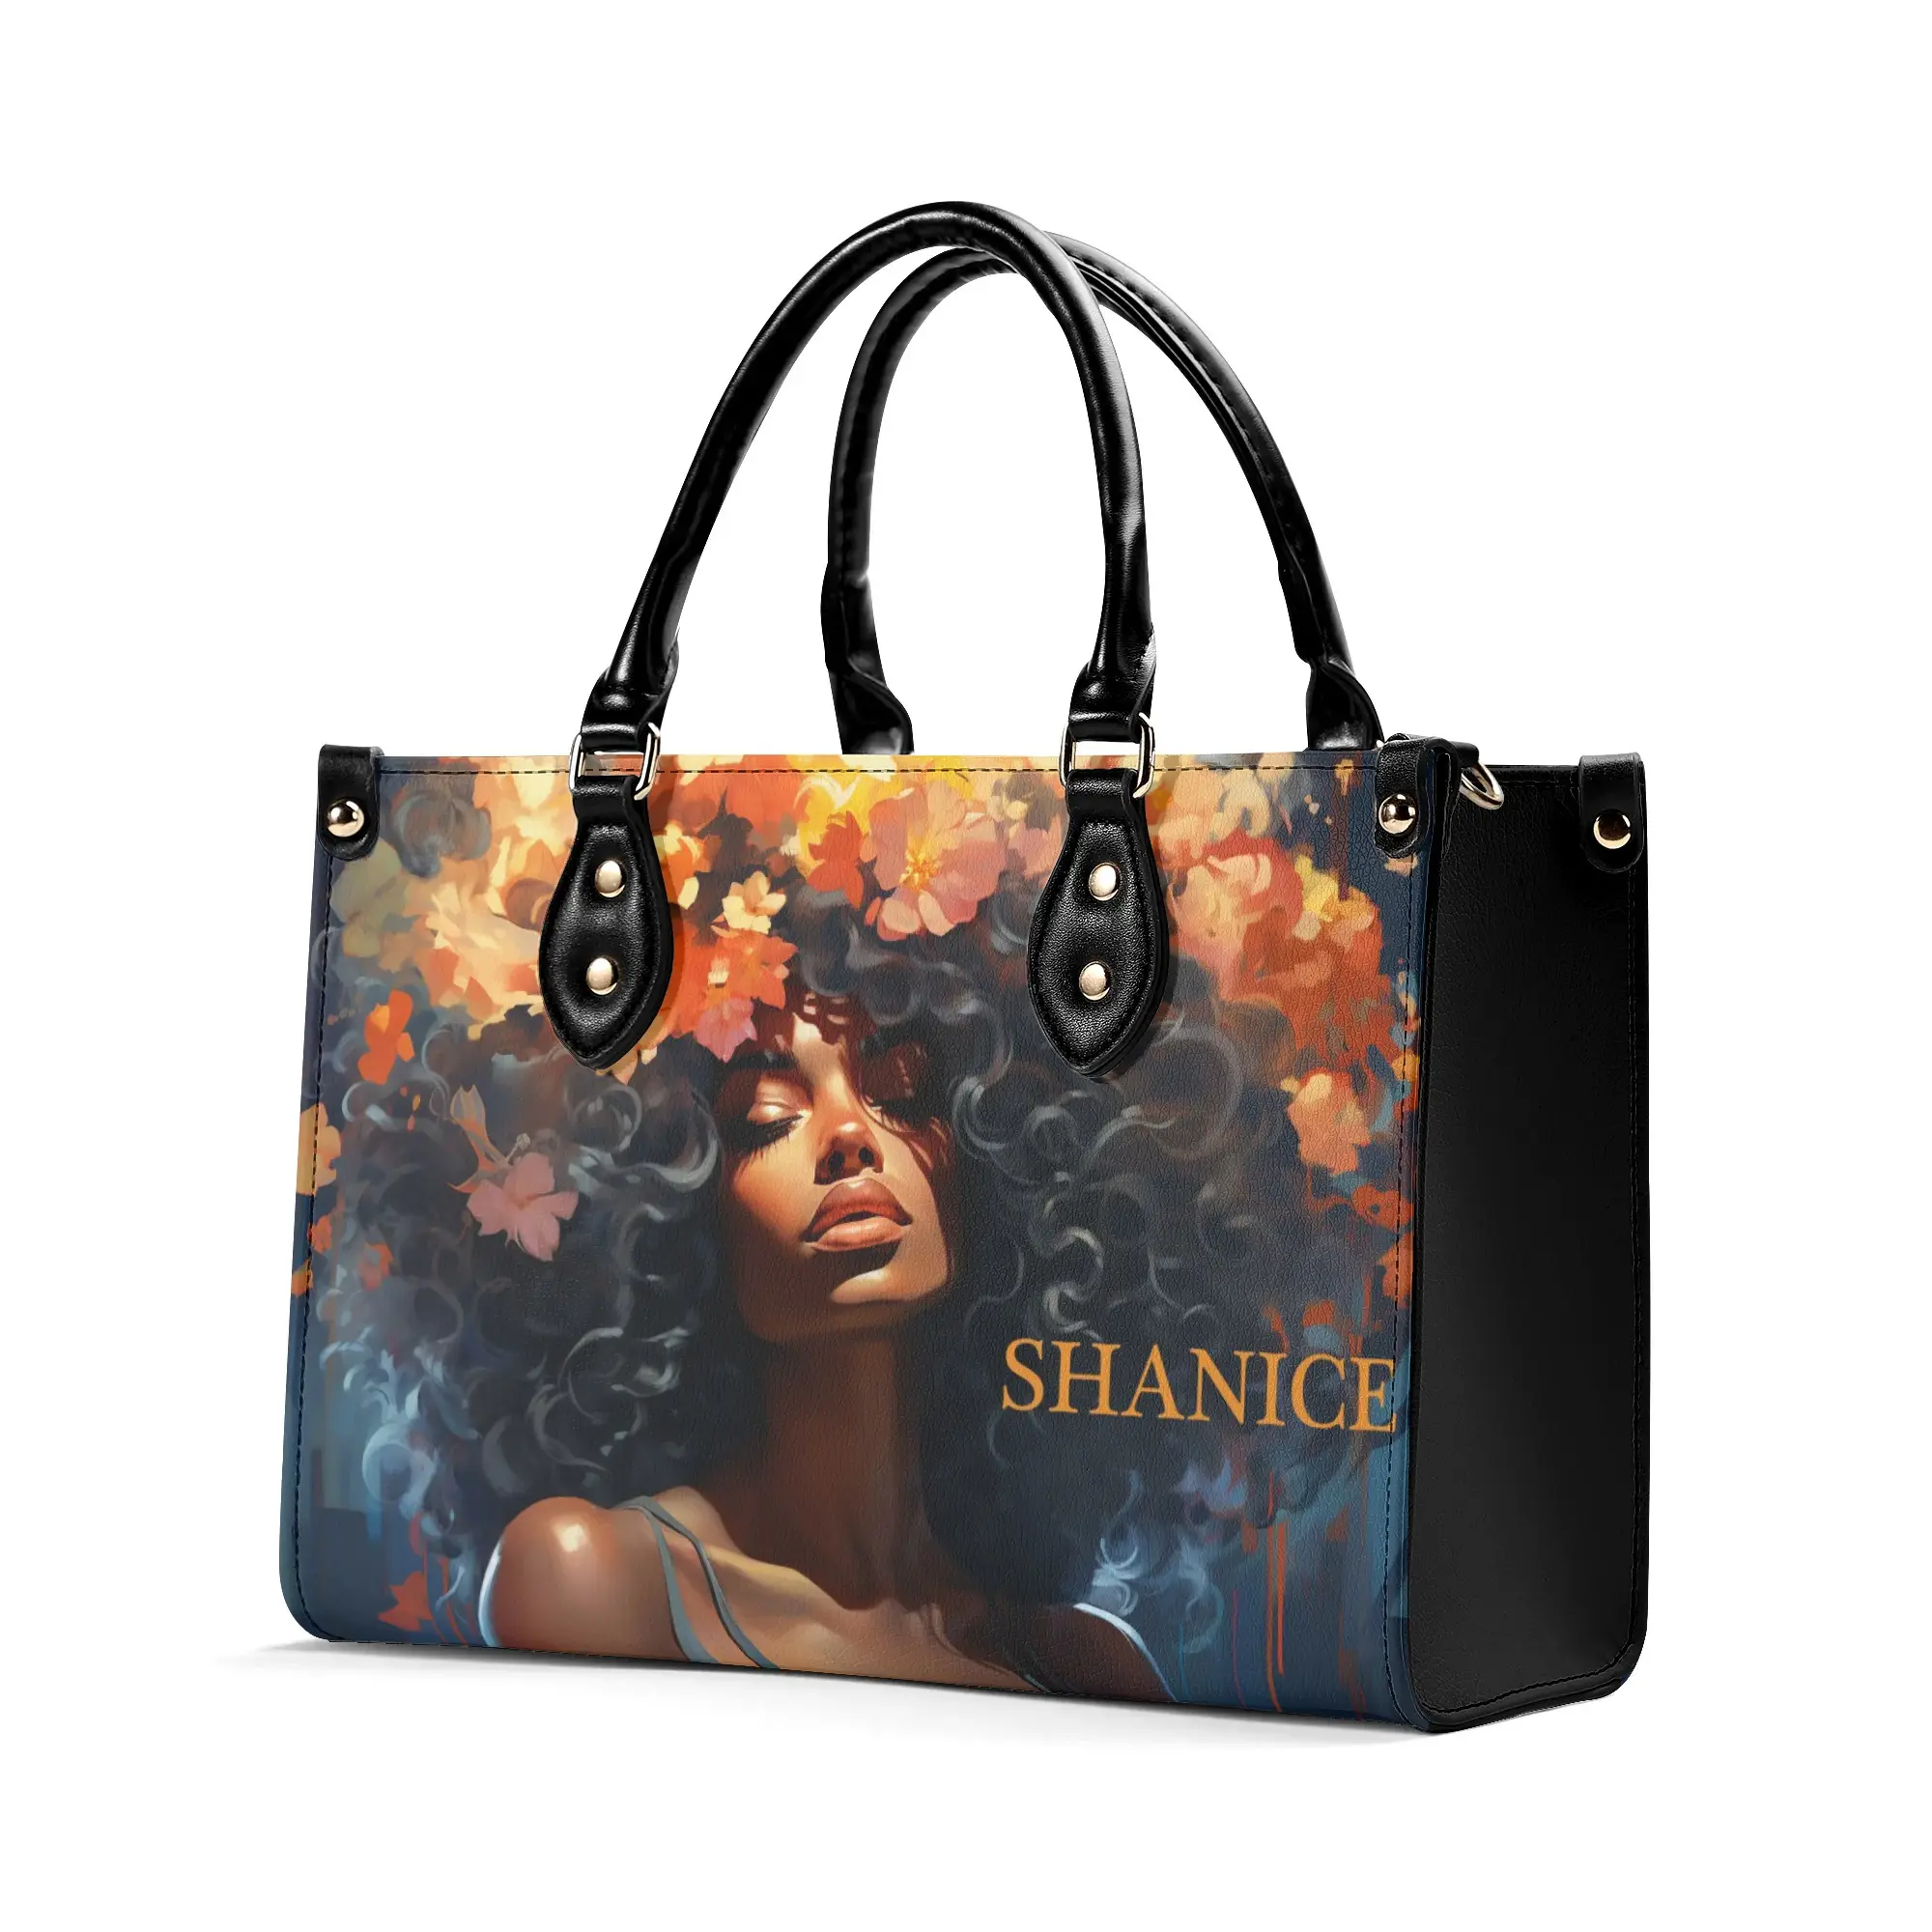 Personalized Leather Handbag African Culture